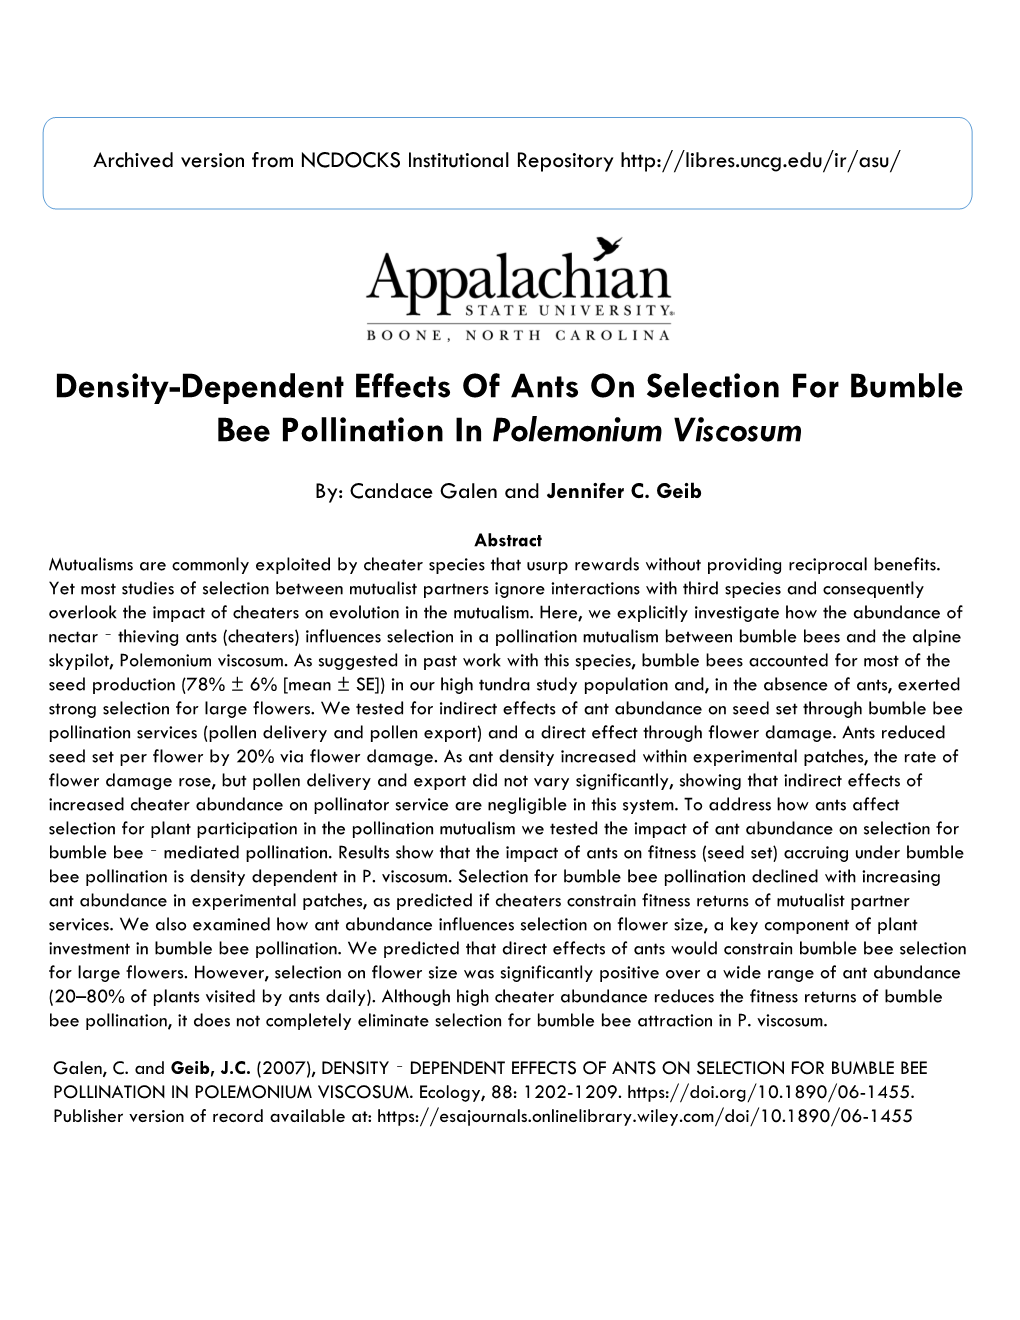 Density-Dependent Effects of Ants on Selection for Bumble Bee Pollination in Polemonium Viscosum